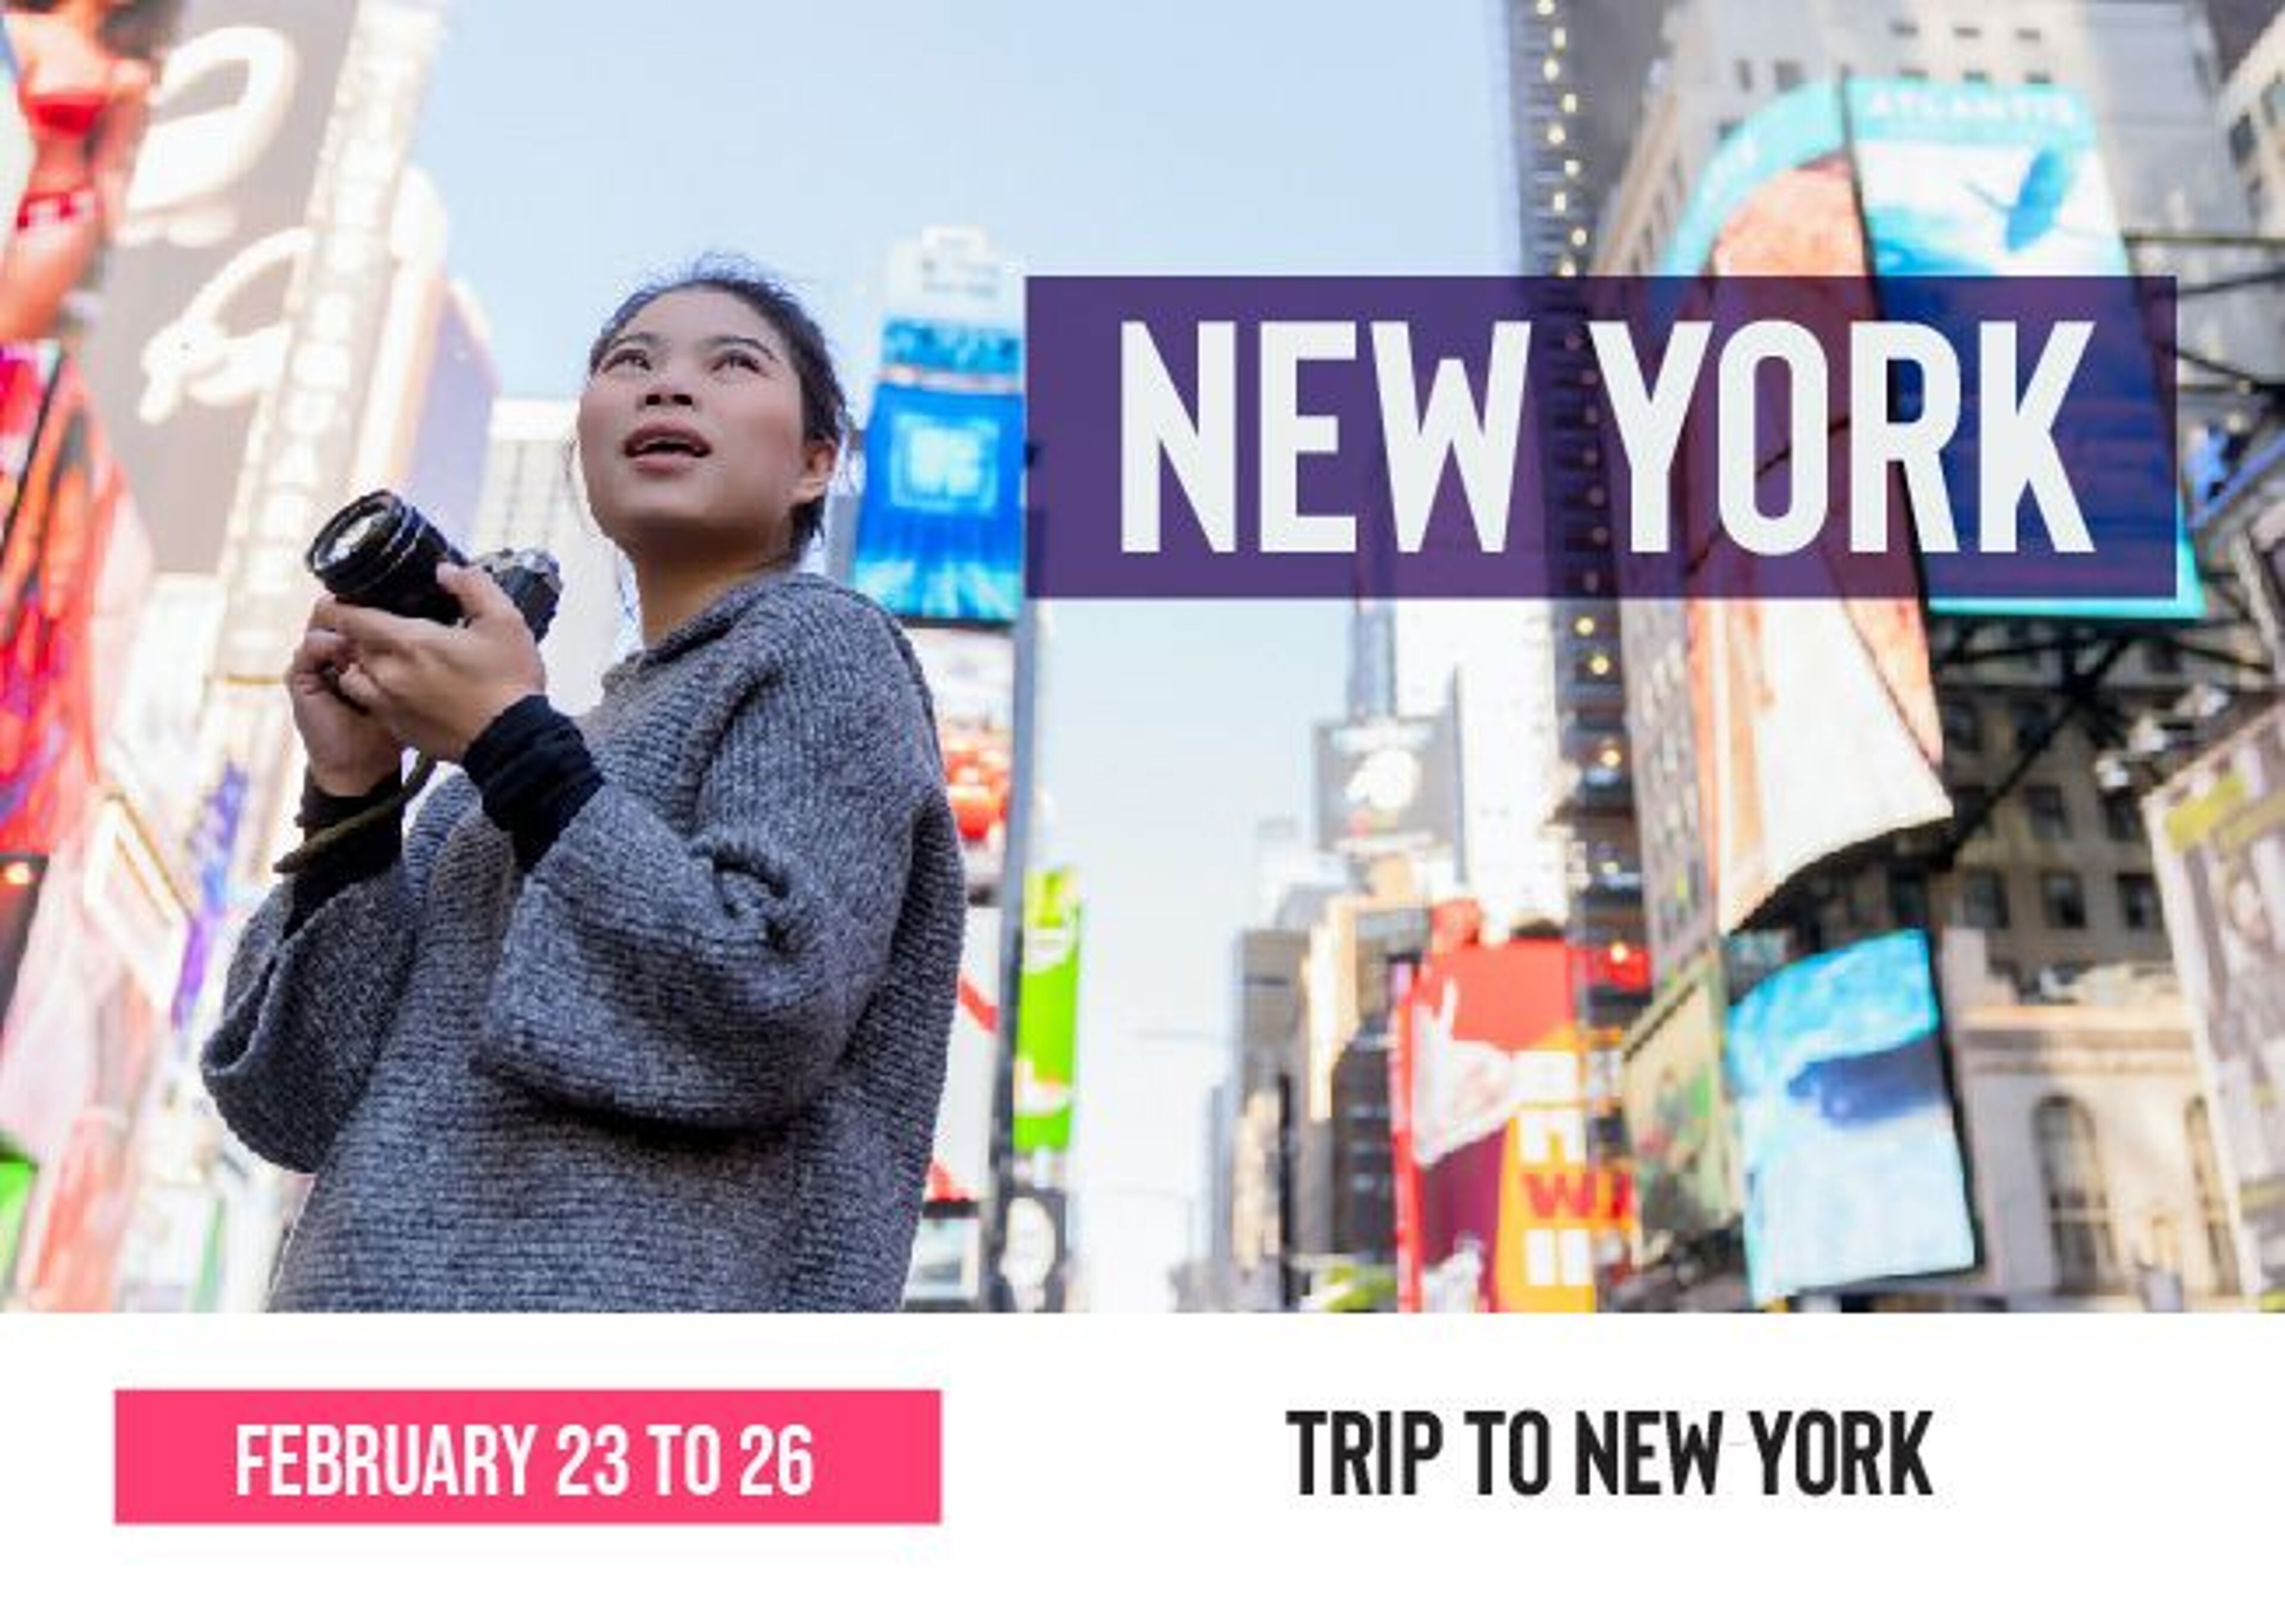 An advertisement for a trip to New York from February 23 to 26, featuring a woman taking photos in Times Square.